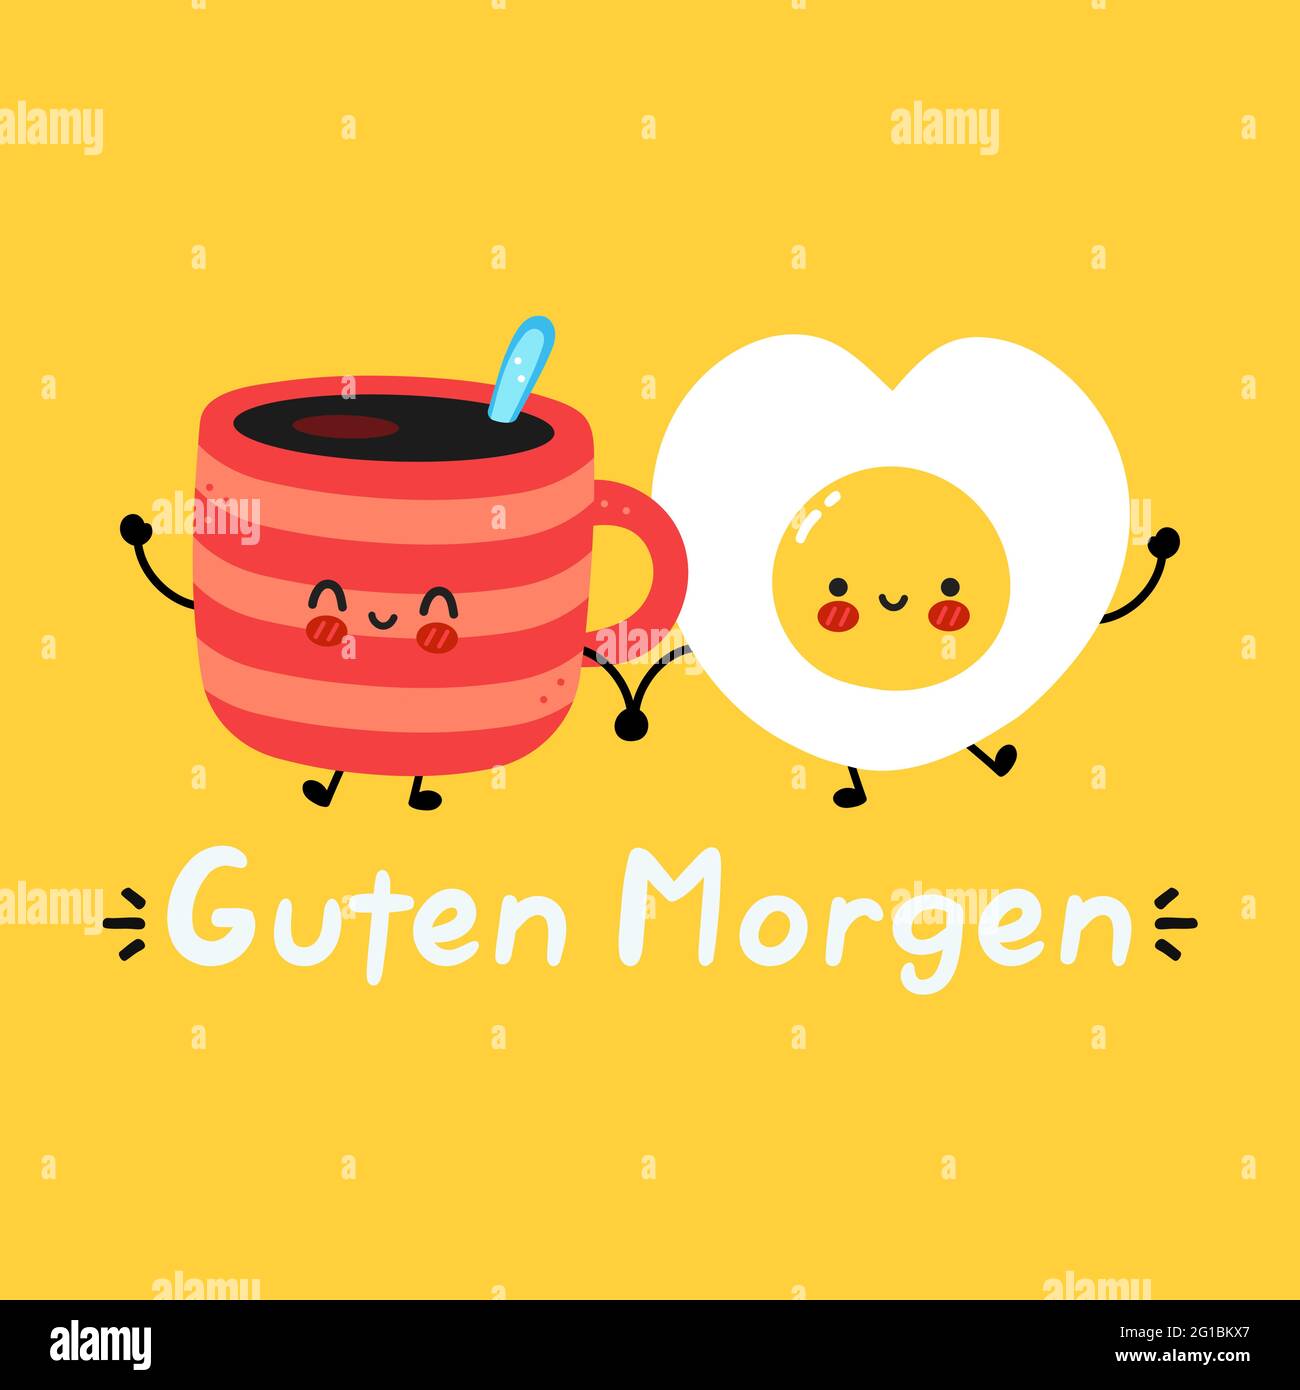 Cute funny happy coffee mug and fried egg character. Guten morgen deutsch quote. Vector hand drawn cartoon kawaii character illustration icon. Germany good morning card, banner concept Stock Vector